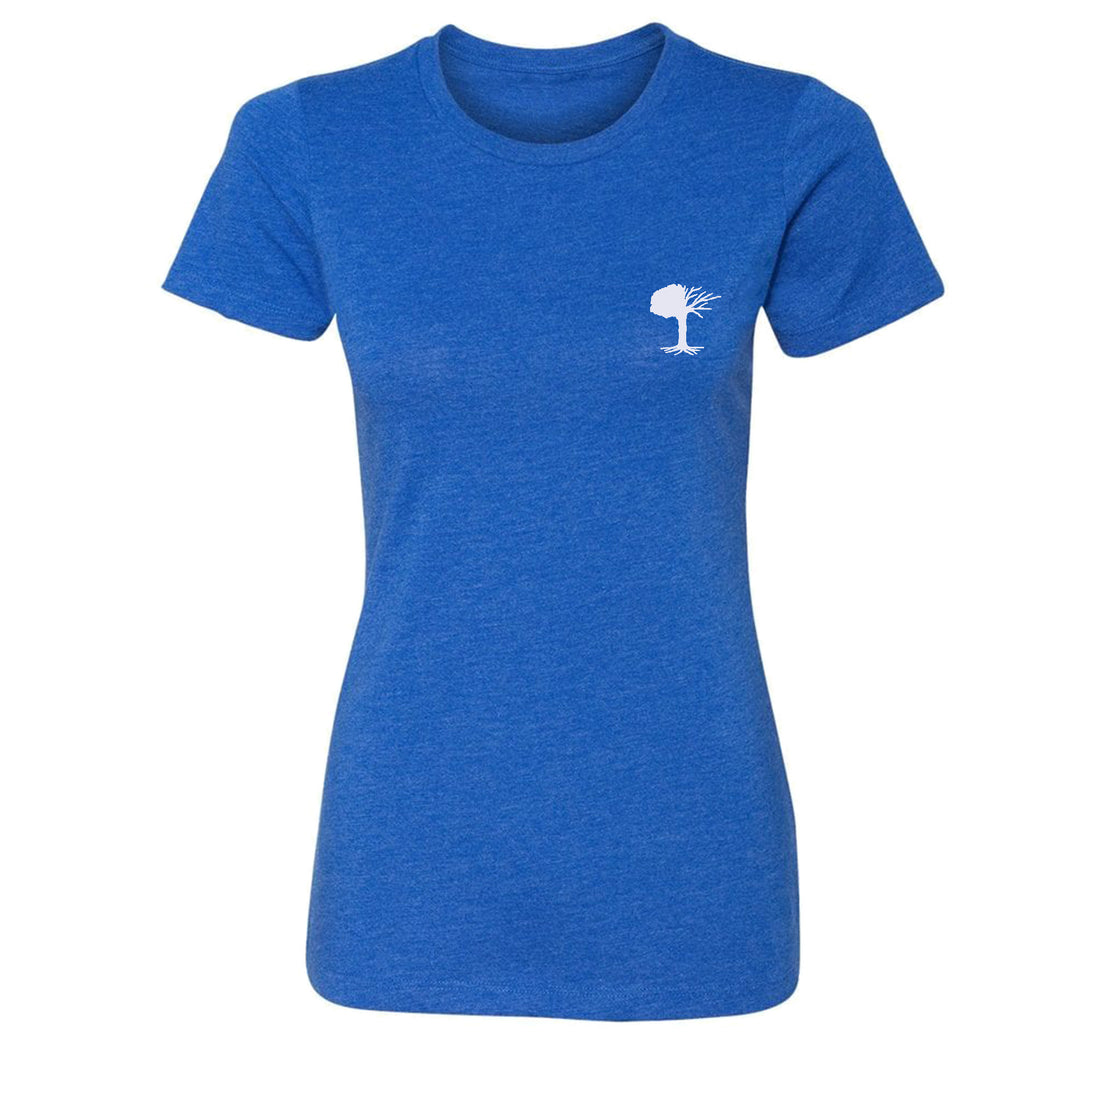 STEM Women's Embroidered T-Shirt - STEM Clothing Group